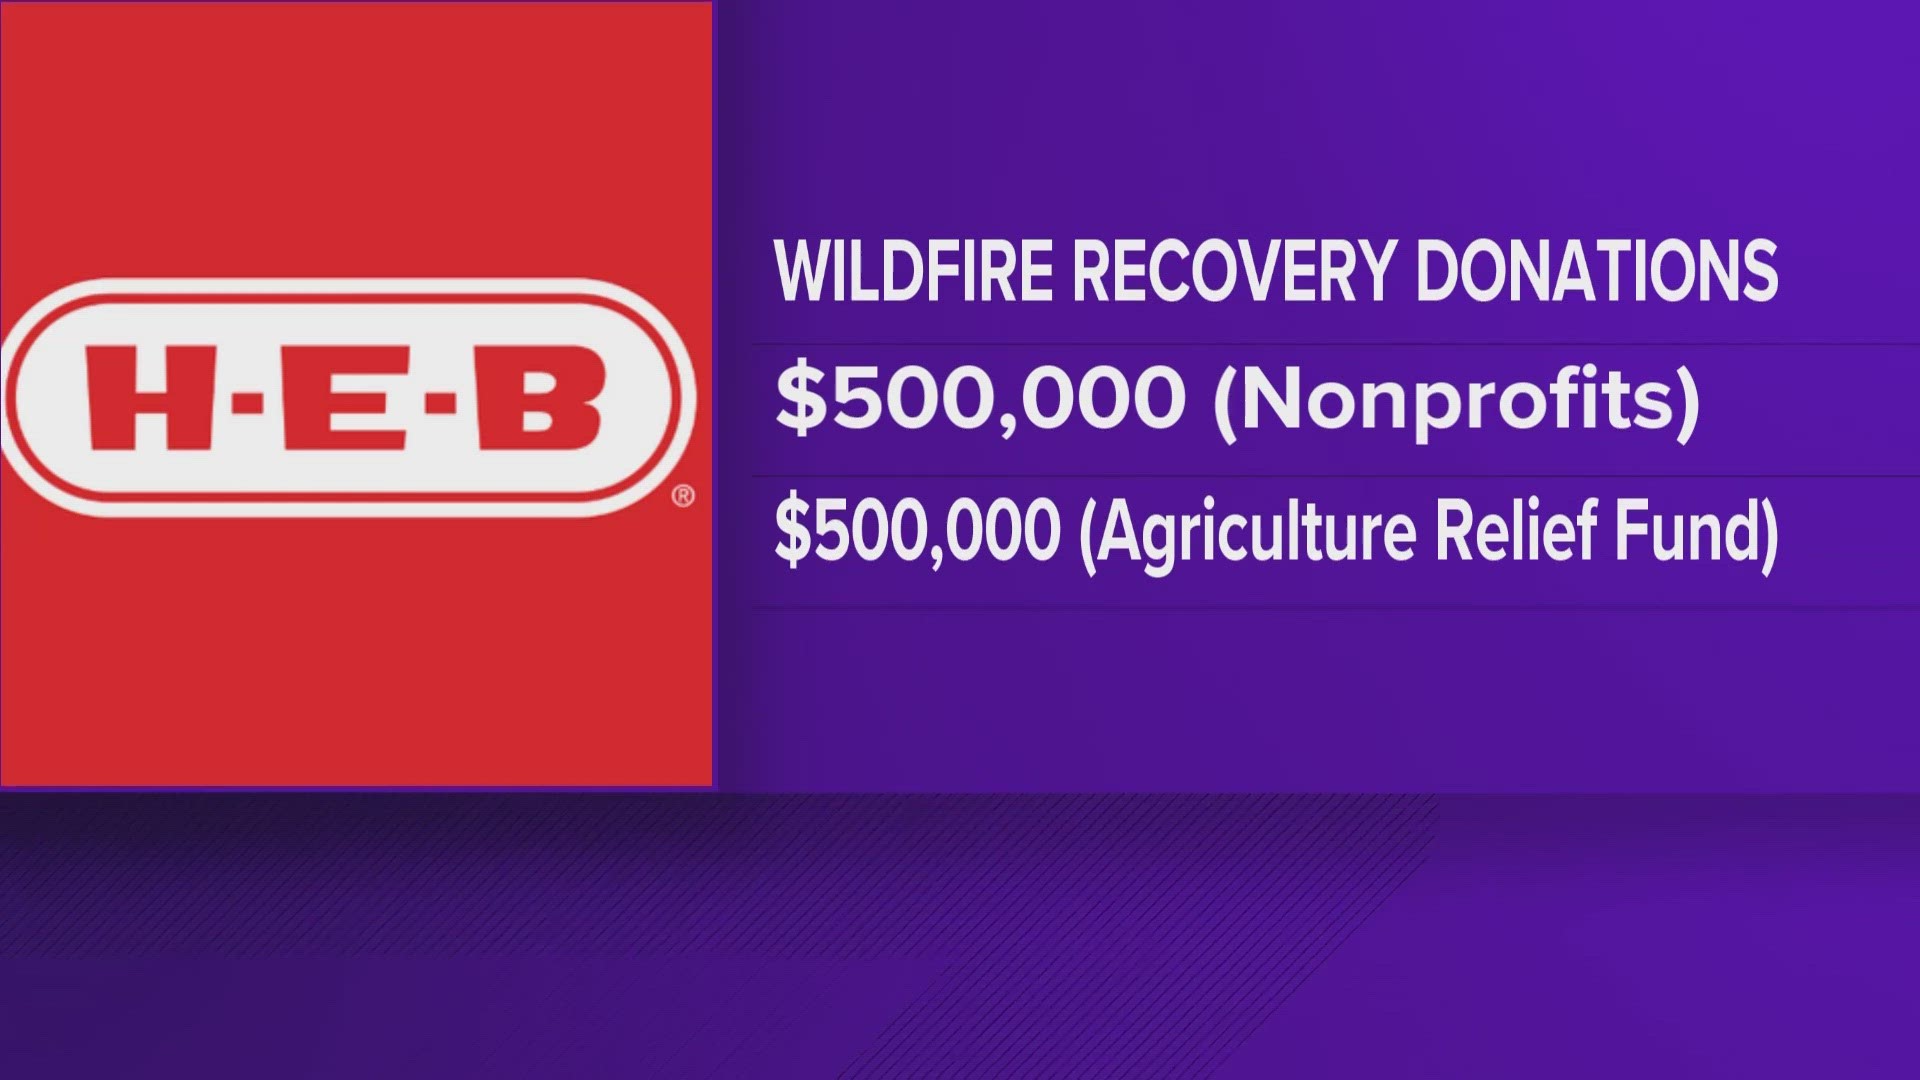 "Our hearts go out to all those impacted by this disaster," H-E-B Group VP of Public Affairs, Diversity and Environmental Affairs Winell Herron said.